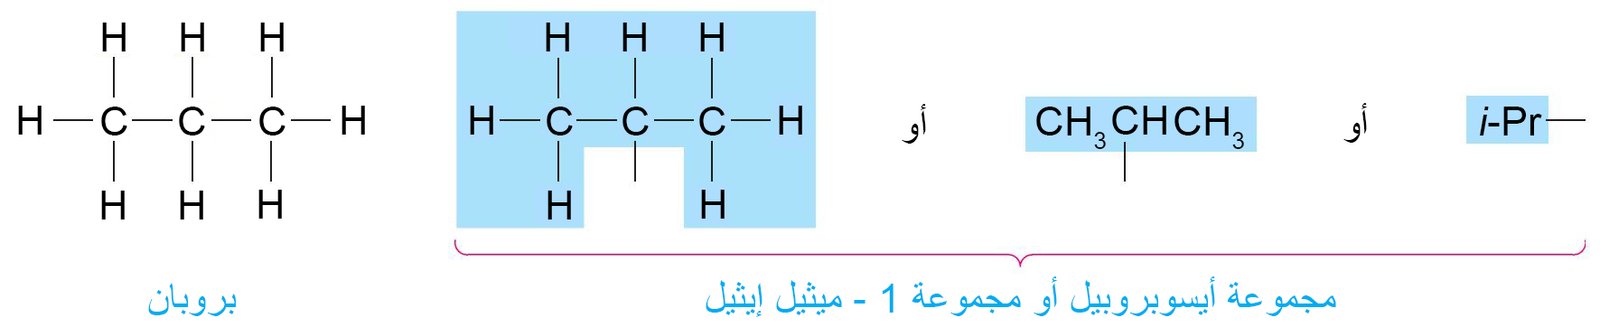 alkyl and halogen substituents 3a